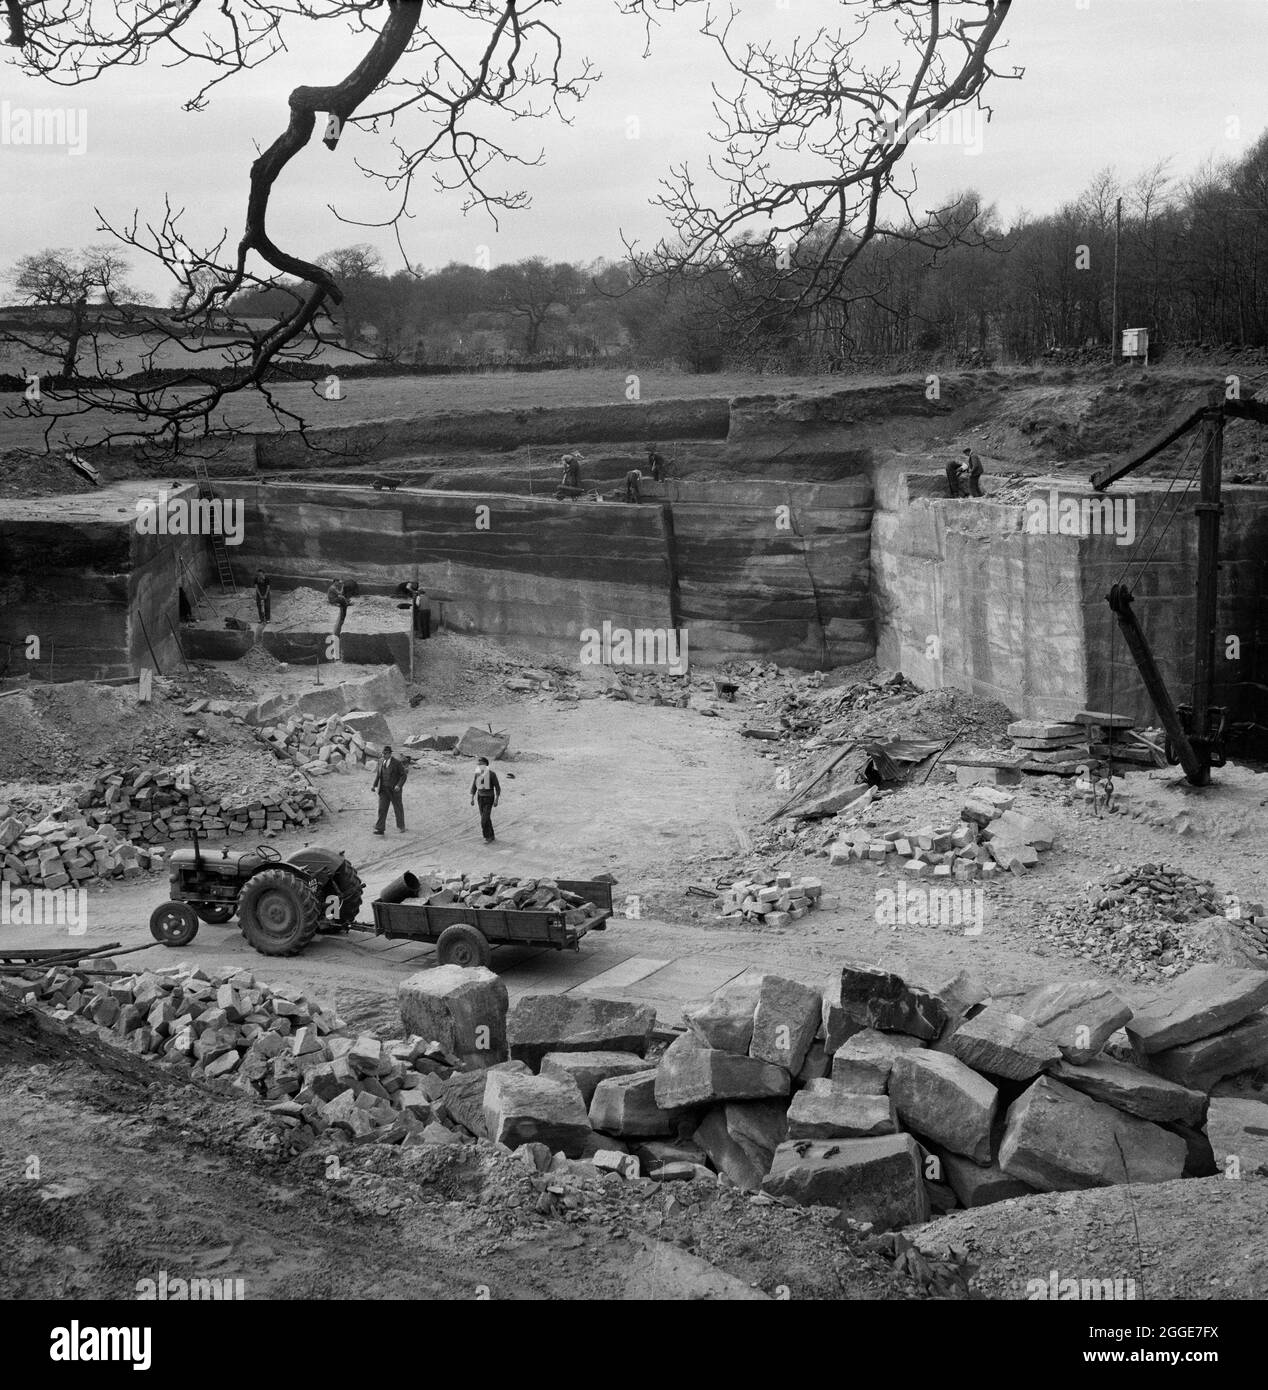 A view over 'Park Quarry' in Great Gate showing workers quarrying sandstone for the construction of Coventry Cathedral. 30,000 tonnes of rose red sandstone was supplied by this quarry, owned by Stanton and Bettany Ltd, and another close by called Fielding's Quarry. Stock Photo